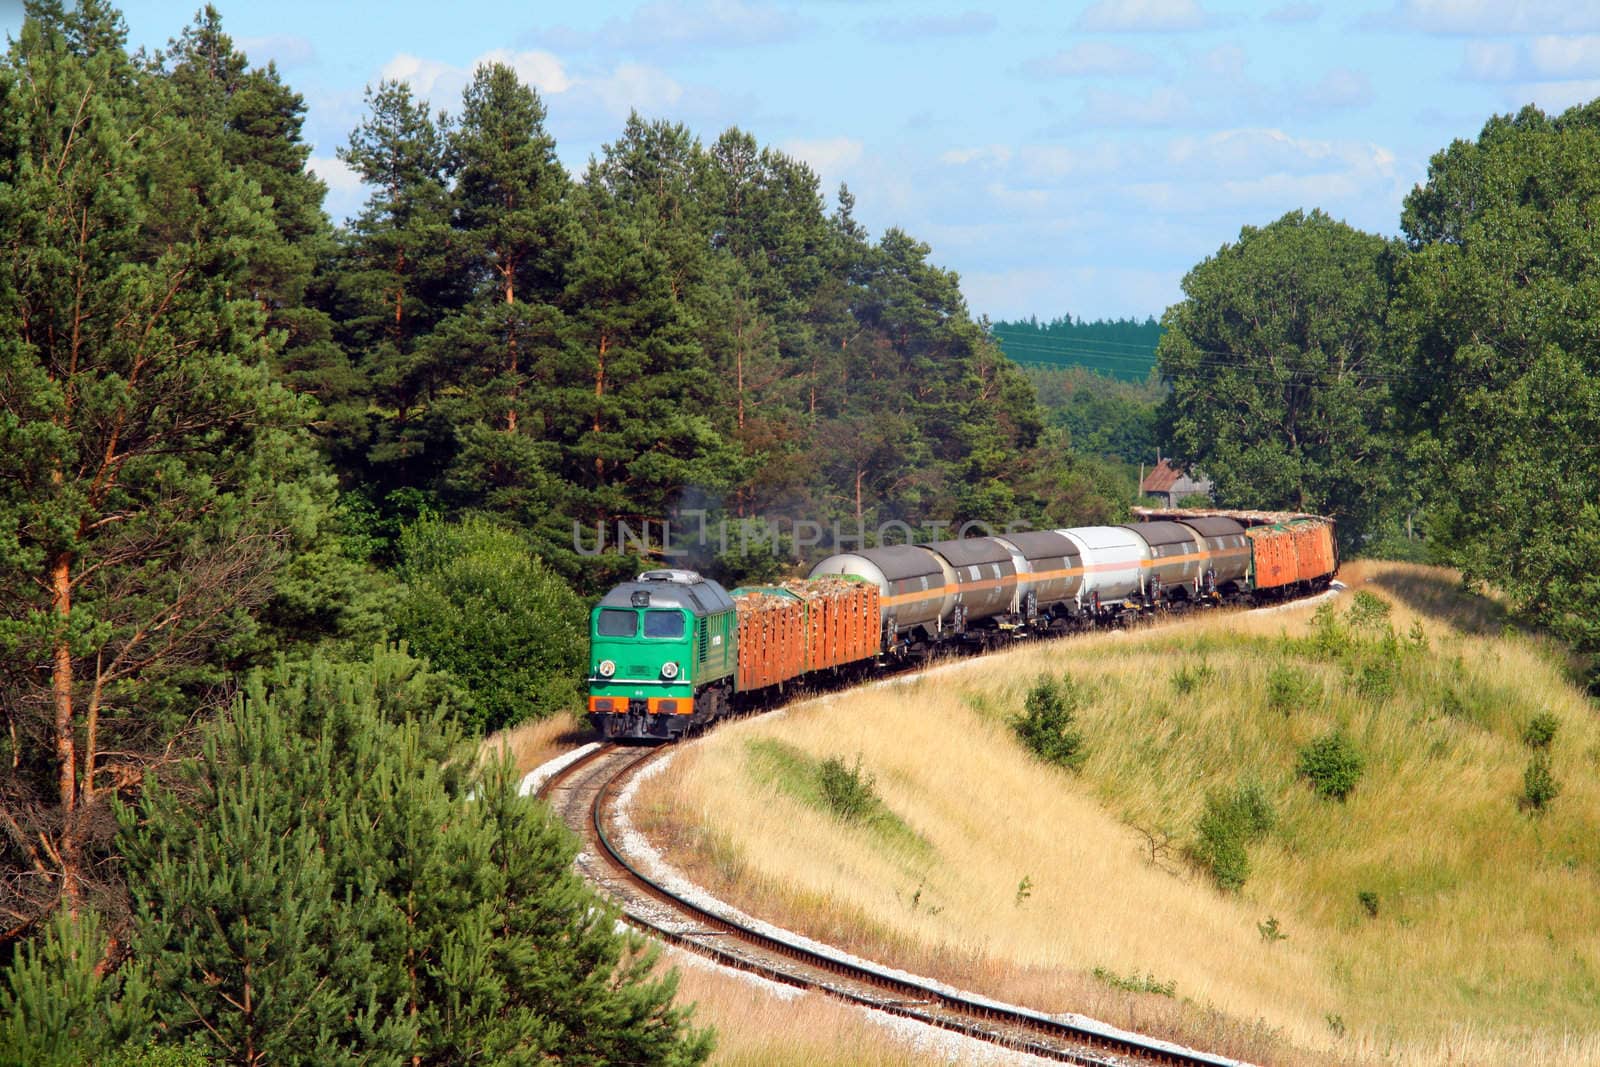 Freight train hauled by the diesel locomotive is passing its route